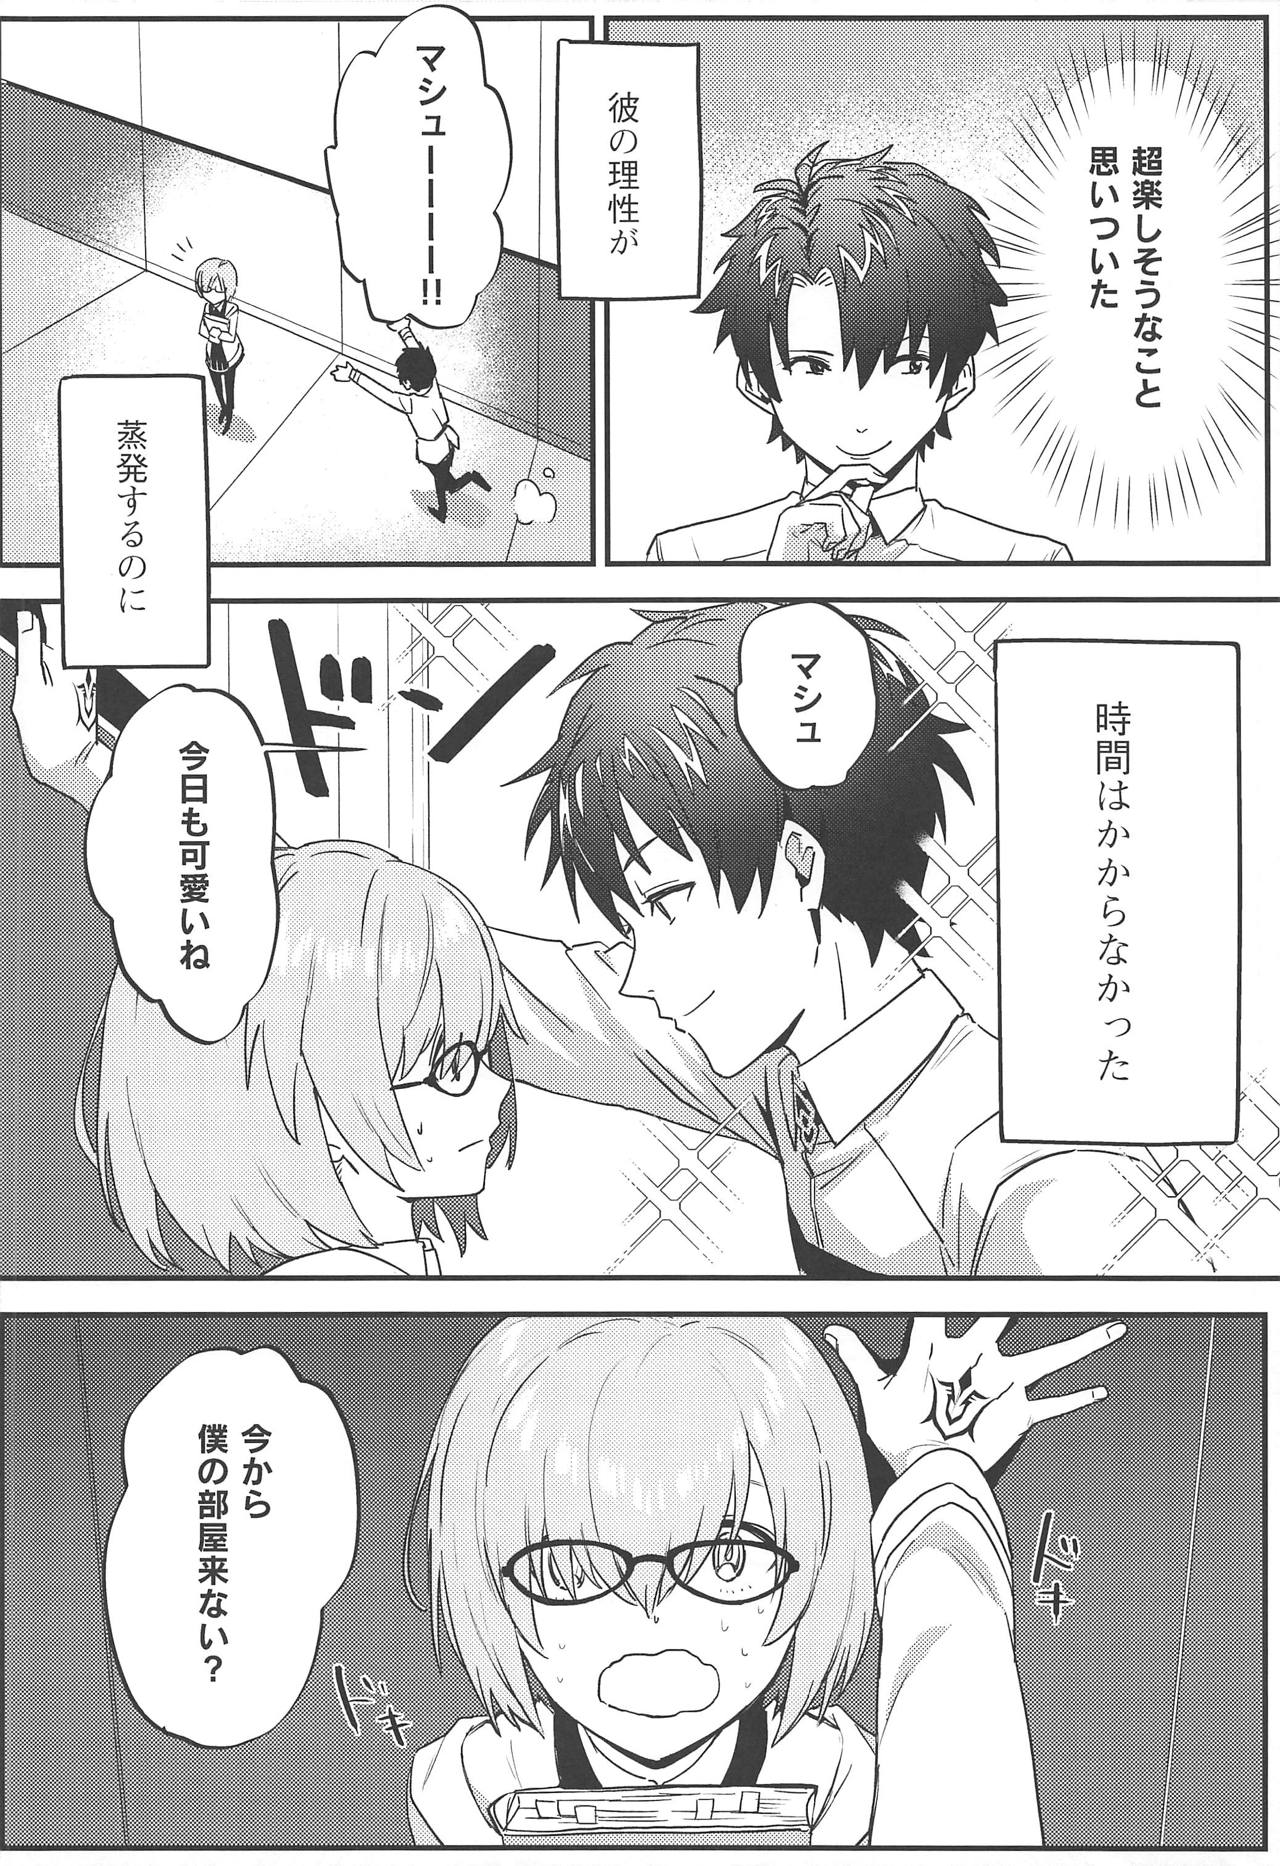 (SC2019 Spring) [Nui GOHAN (Nui)] Jeanne Alter to Futari no Astolfo (Fate/Grand Order) page 15 full